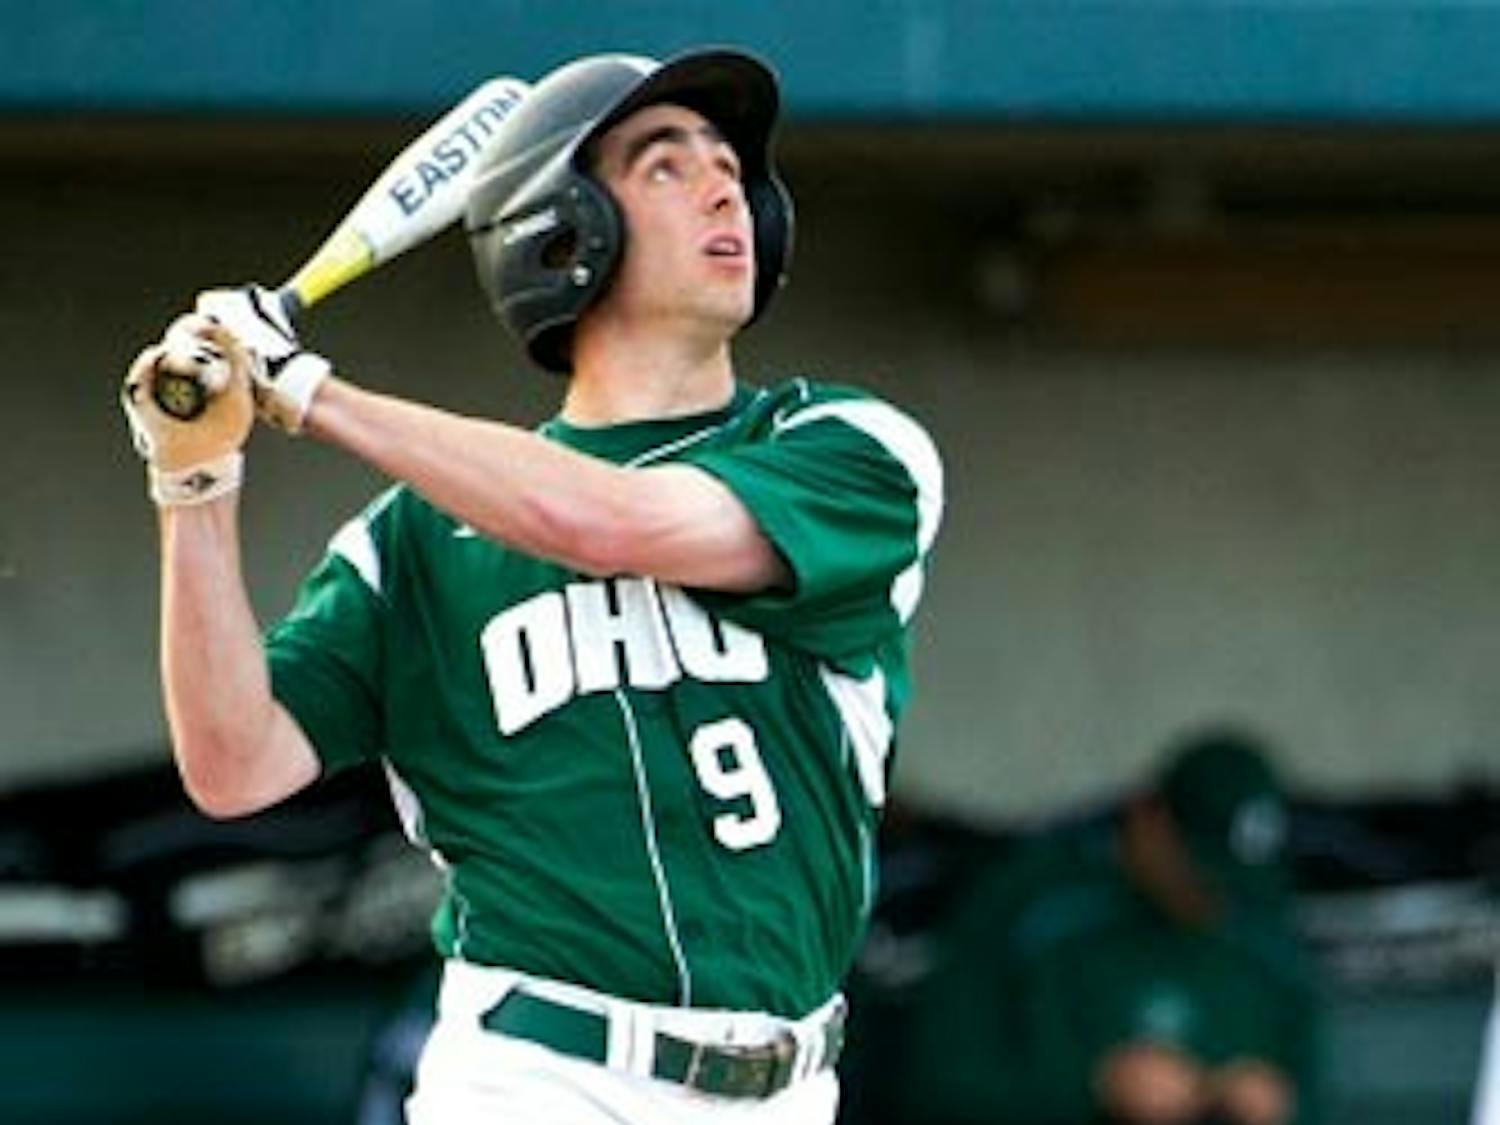 For Bobcat hitters, scoring first is secondary in overall importance  